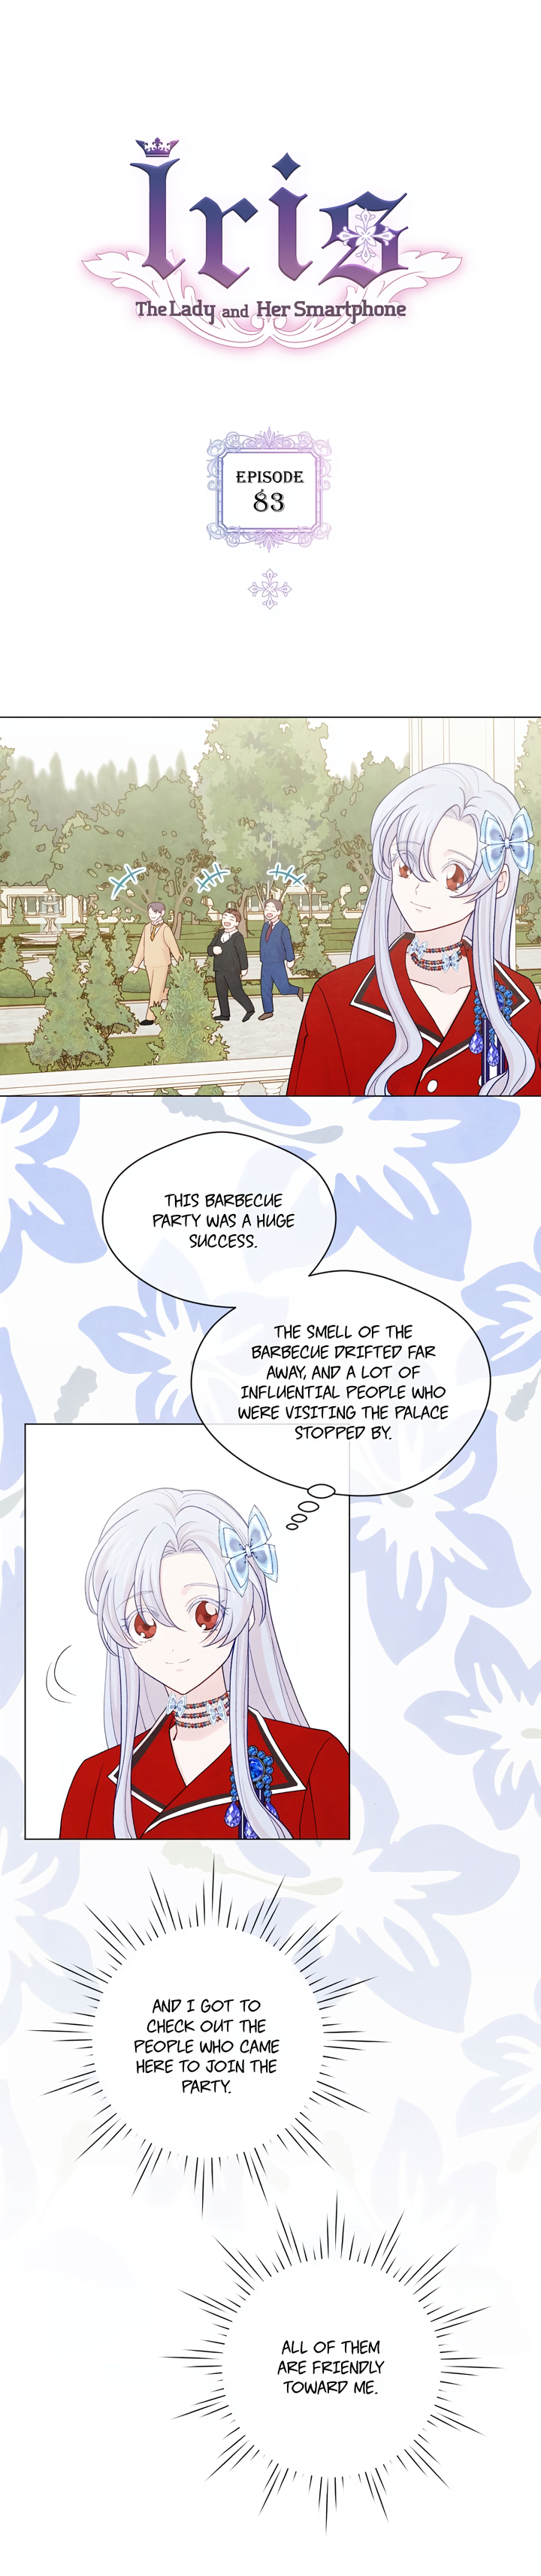 IRIS – Lady with a Smartphone Chapter 83 - Page 0